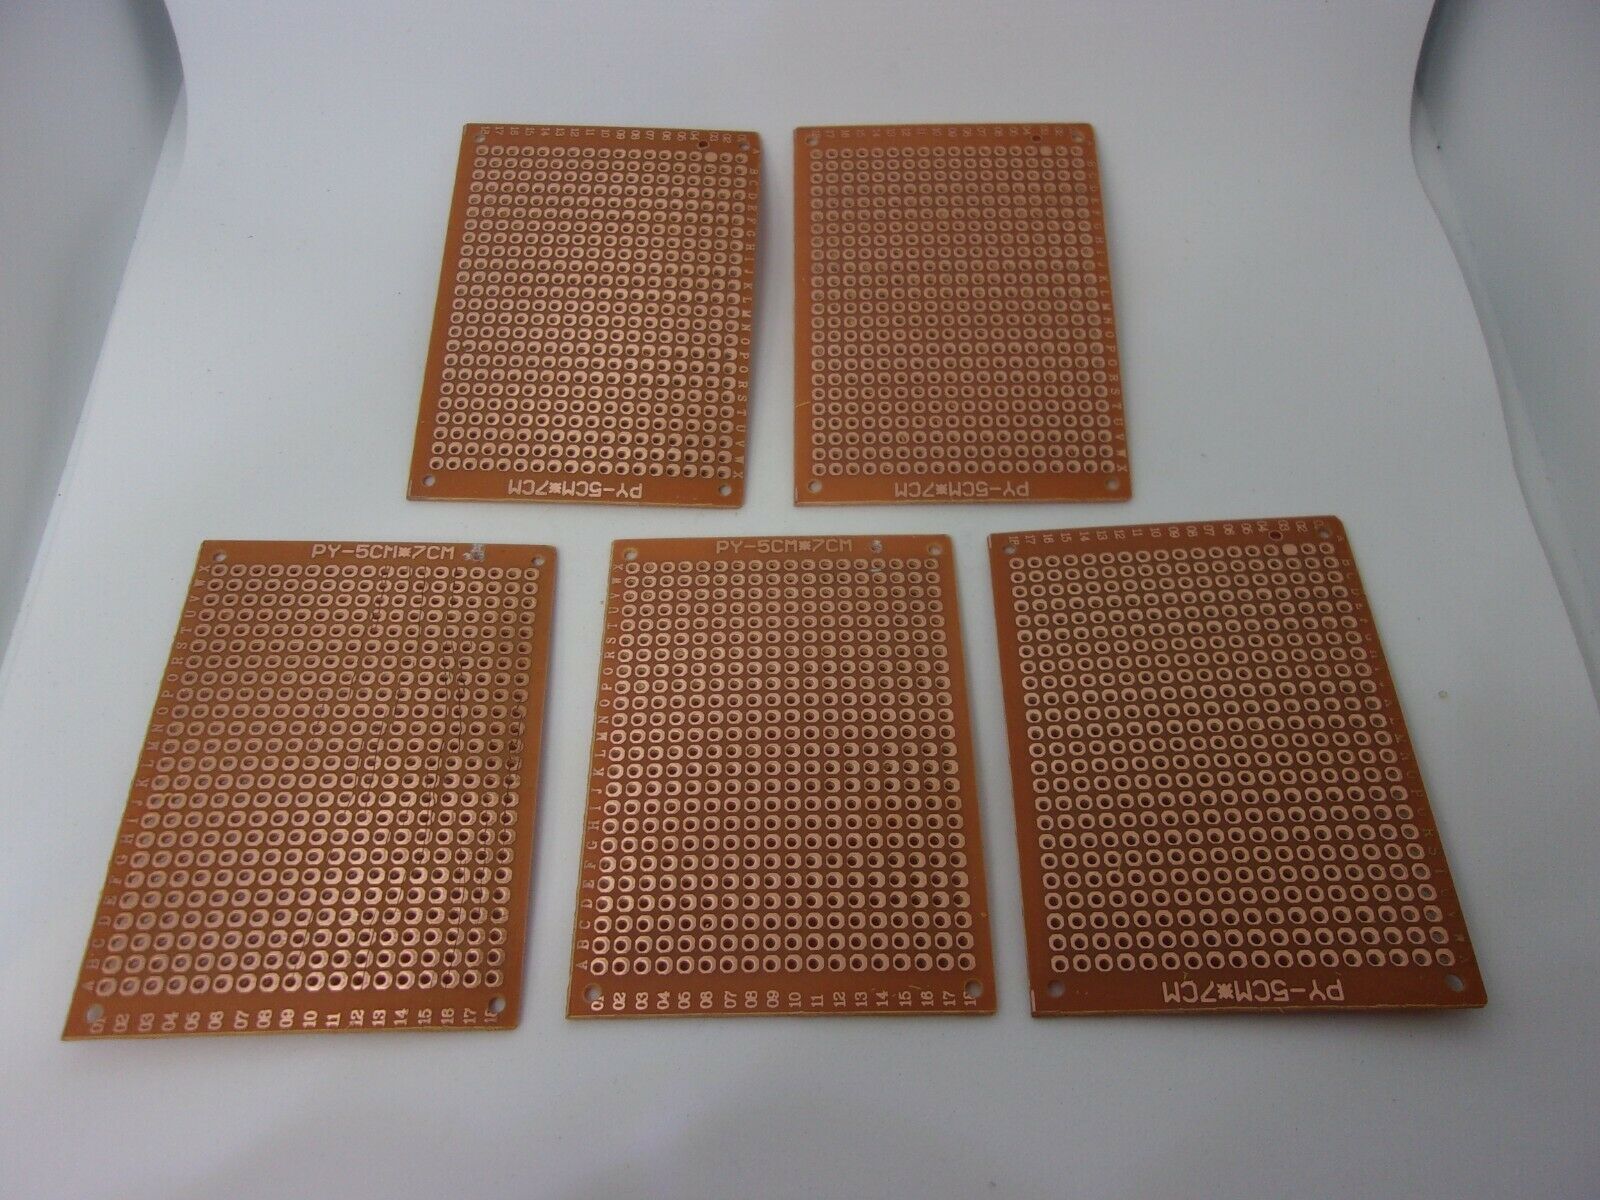 Primary image for 5Pcs Pack Lot Blank 5x7cm Electronics Prototype Integrated Circuit Board Set Kit